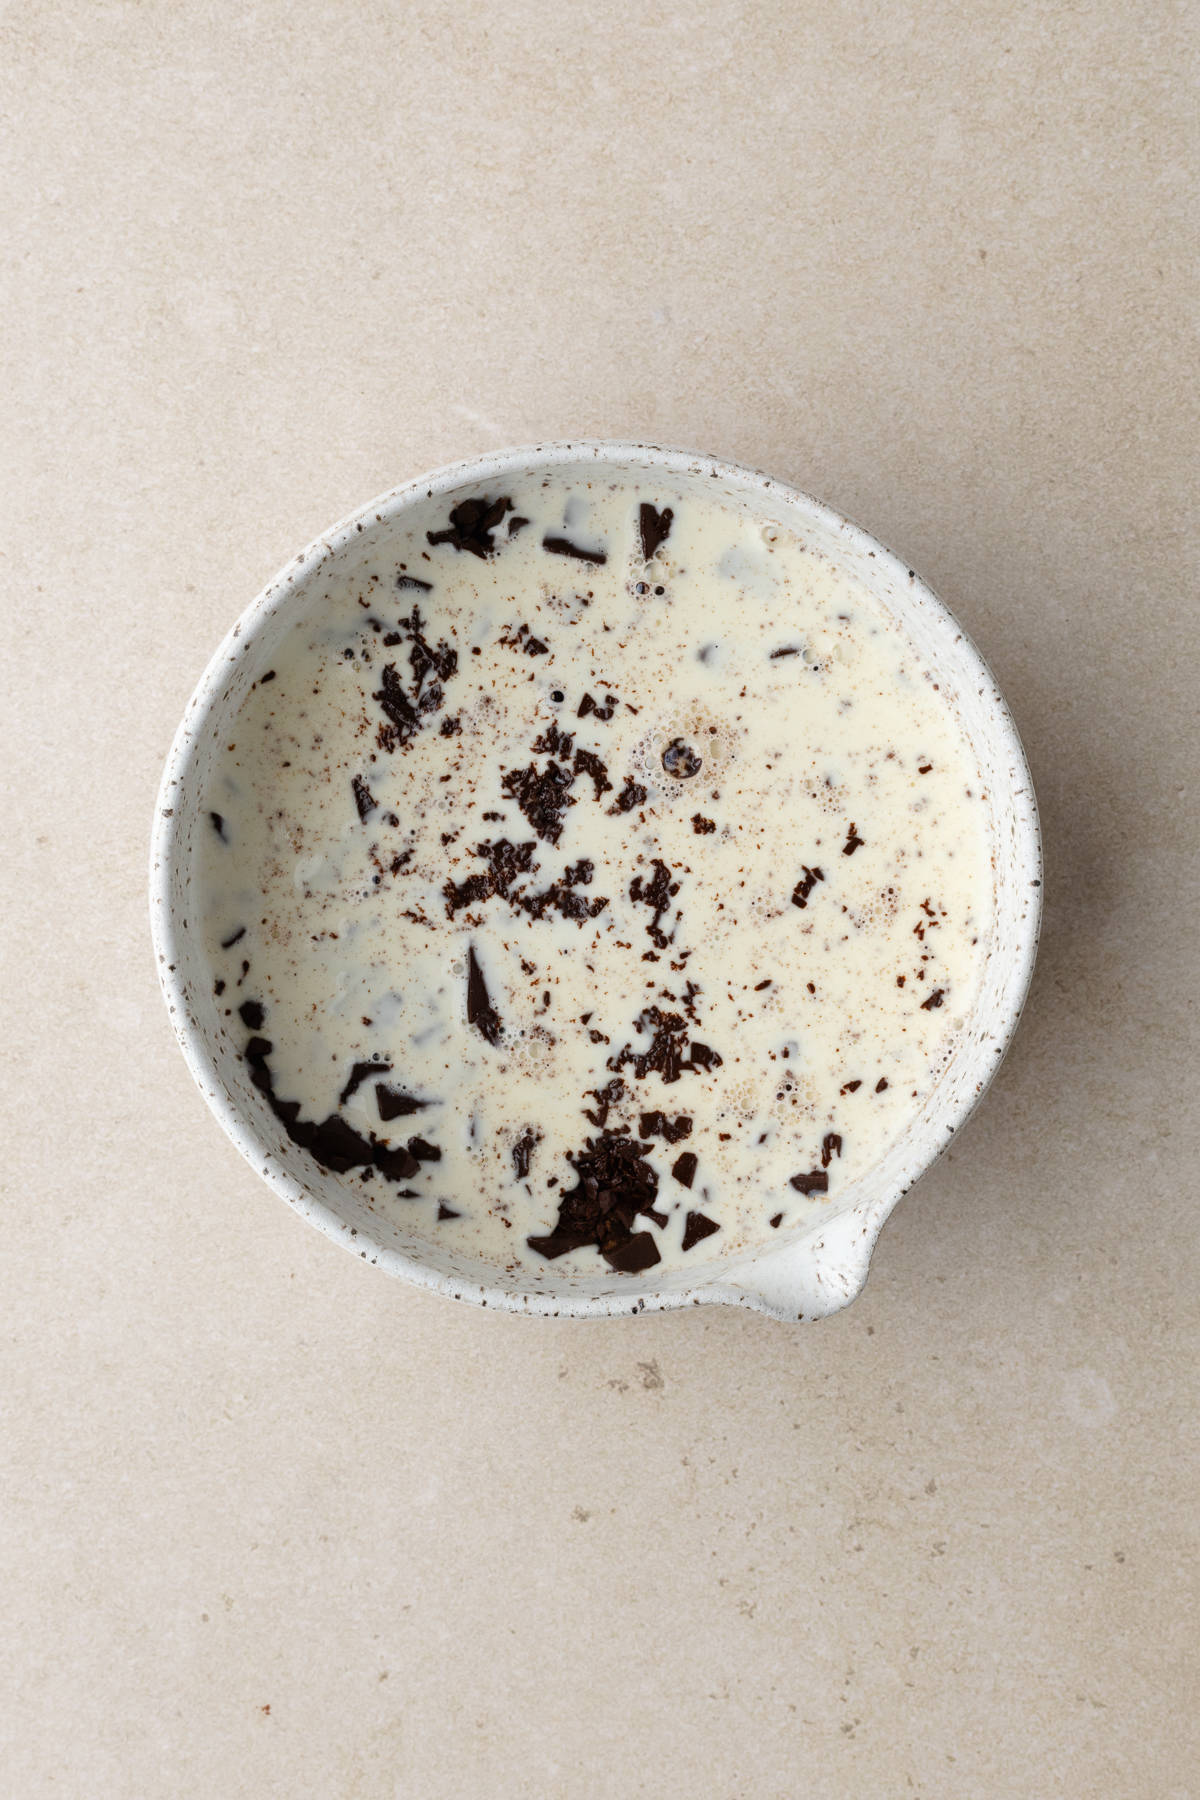 Finely chopped chocolate submerged in hot cream